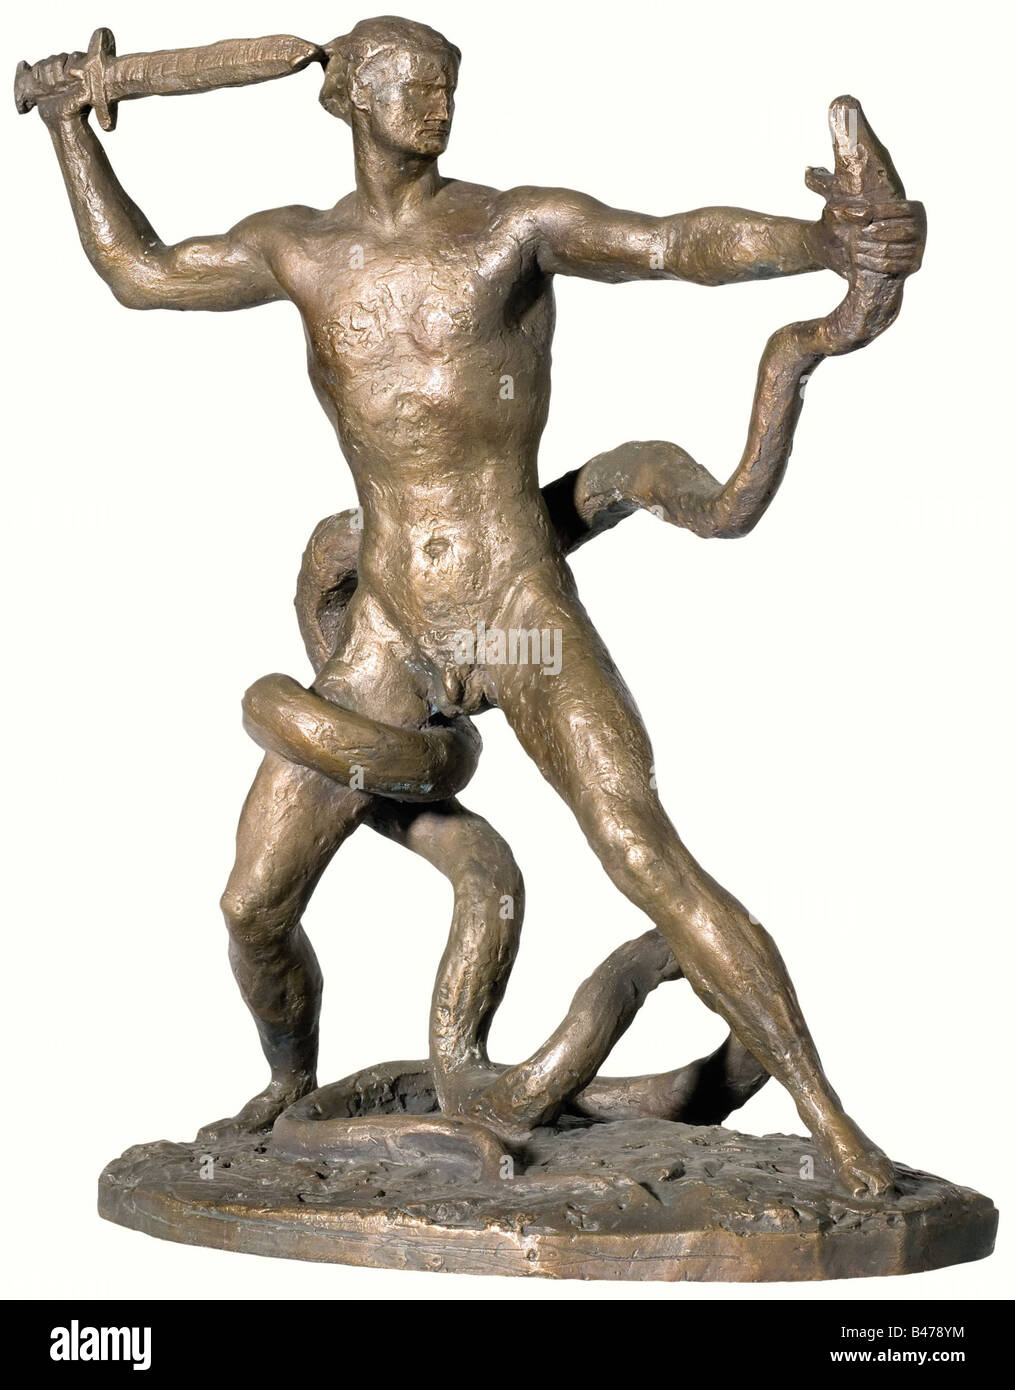 Ferdinand Liebermann (1883 - 1941) - The Fight., Small bronze sculpture, study for the Munich Freikorps monument on Giesinger Berg. Plinth signed on the reverse side with 'Liebermann'. Height 35,5 cm. In May 1942 Liebermann's Freikorps monument was unveiled at Giesinger Berg by Reichsstatthalter (i.e. Governour) Ritter von Epp and Lord Mayor Reichsleiter Fiehler. The study offered here was made in 1939/40 and was displayed at the Great German Art Exhibition in Munich, 1941. Ferdinand Liebermann finished his education at the Munich School of Arts and C, Artist's Copyright has not to be cleared Stock Photo